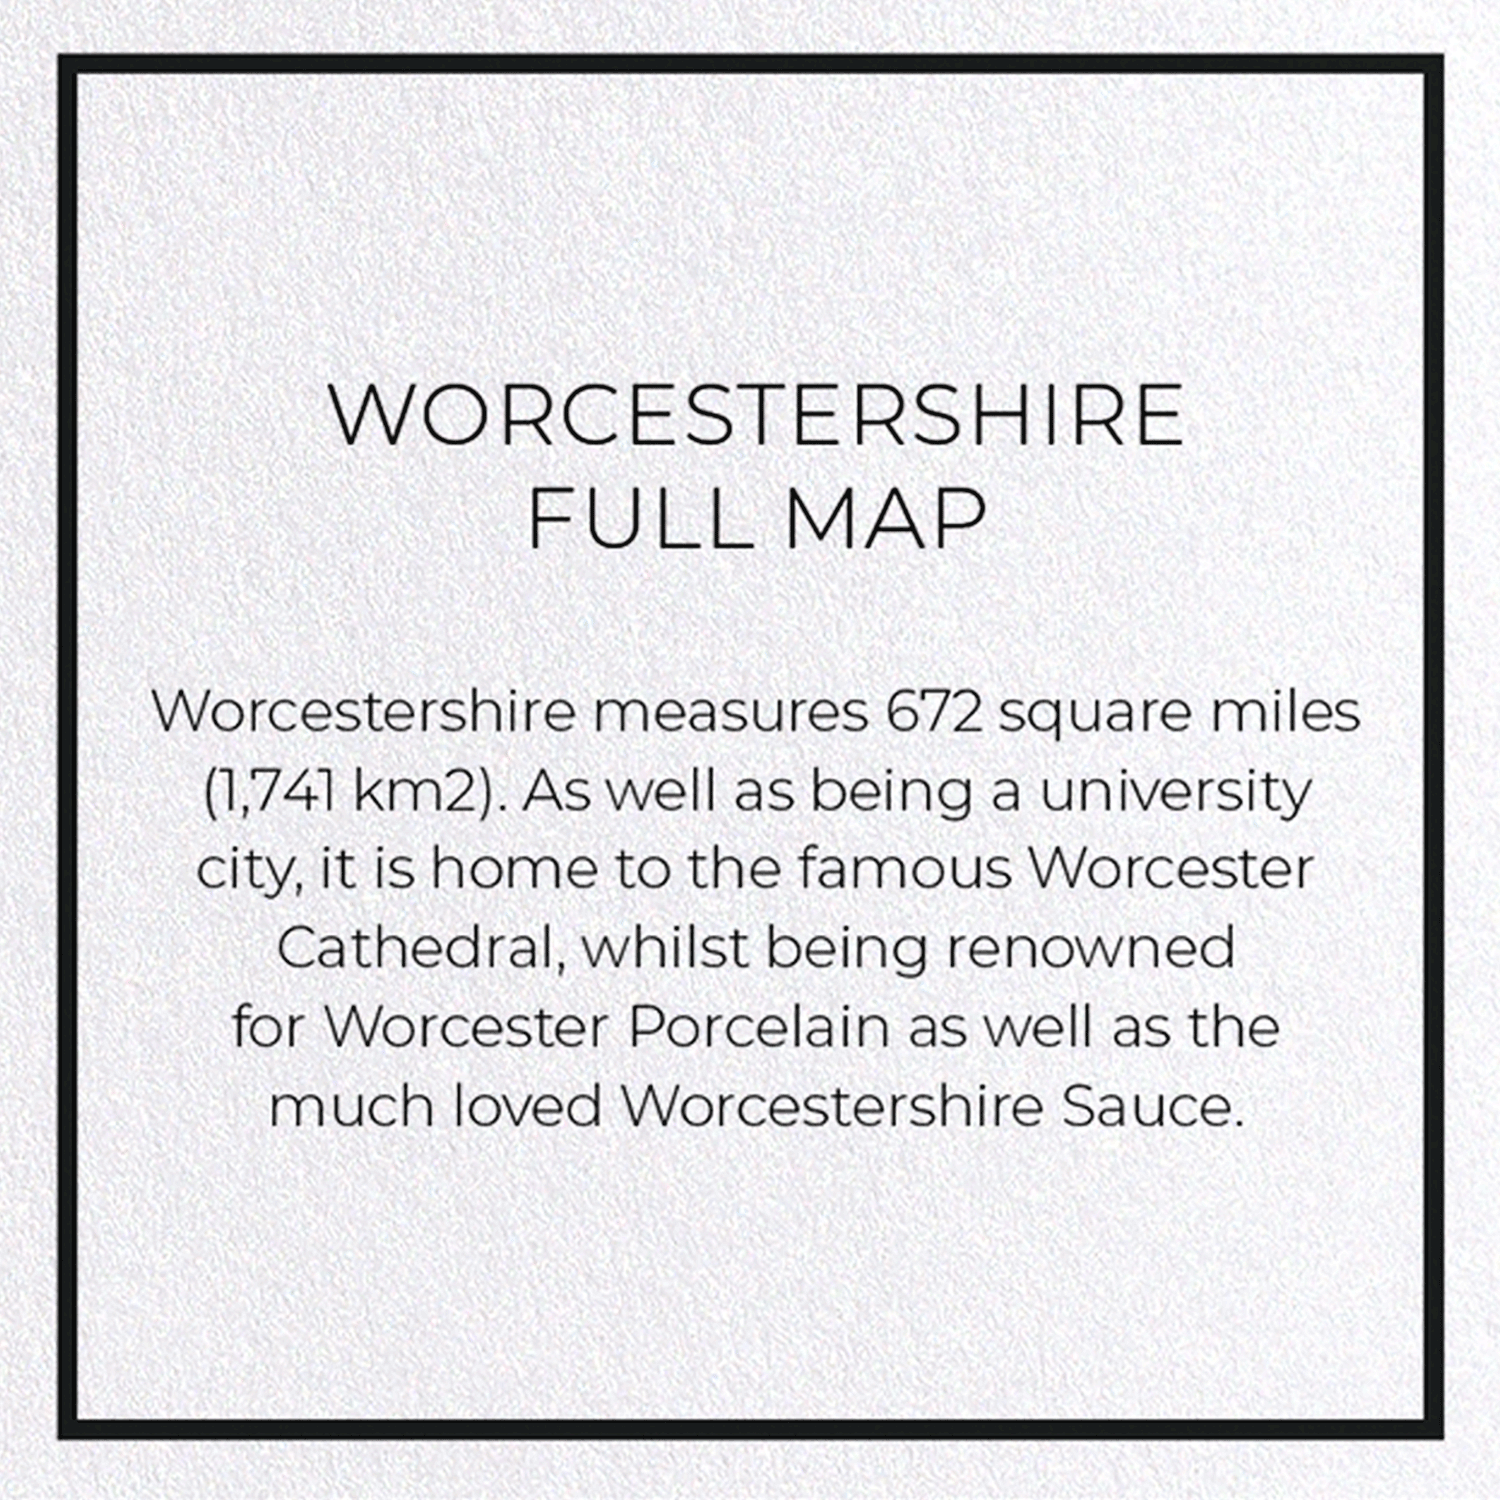 WORCESTERSHIRE FULL MAP